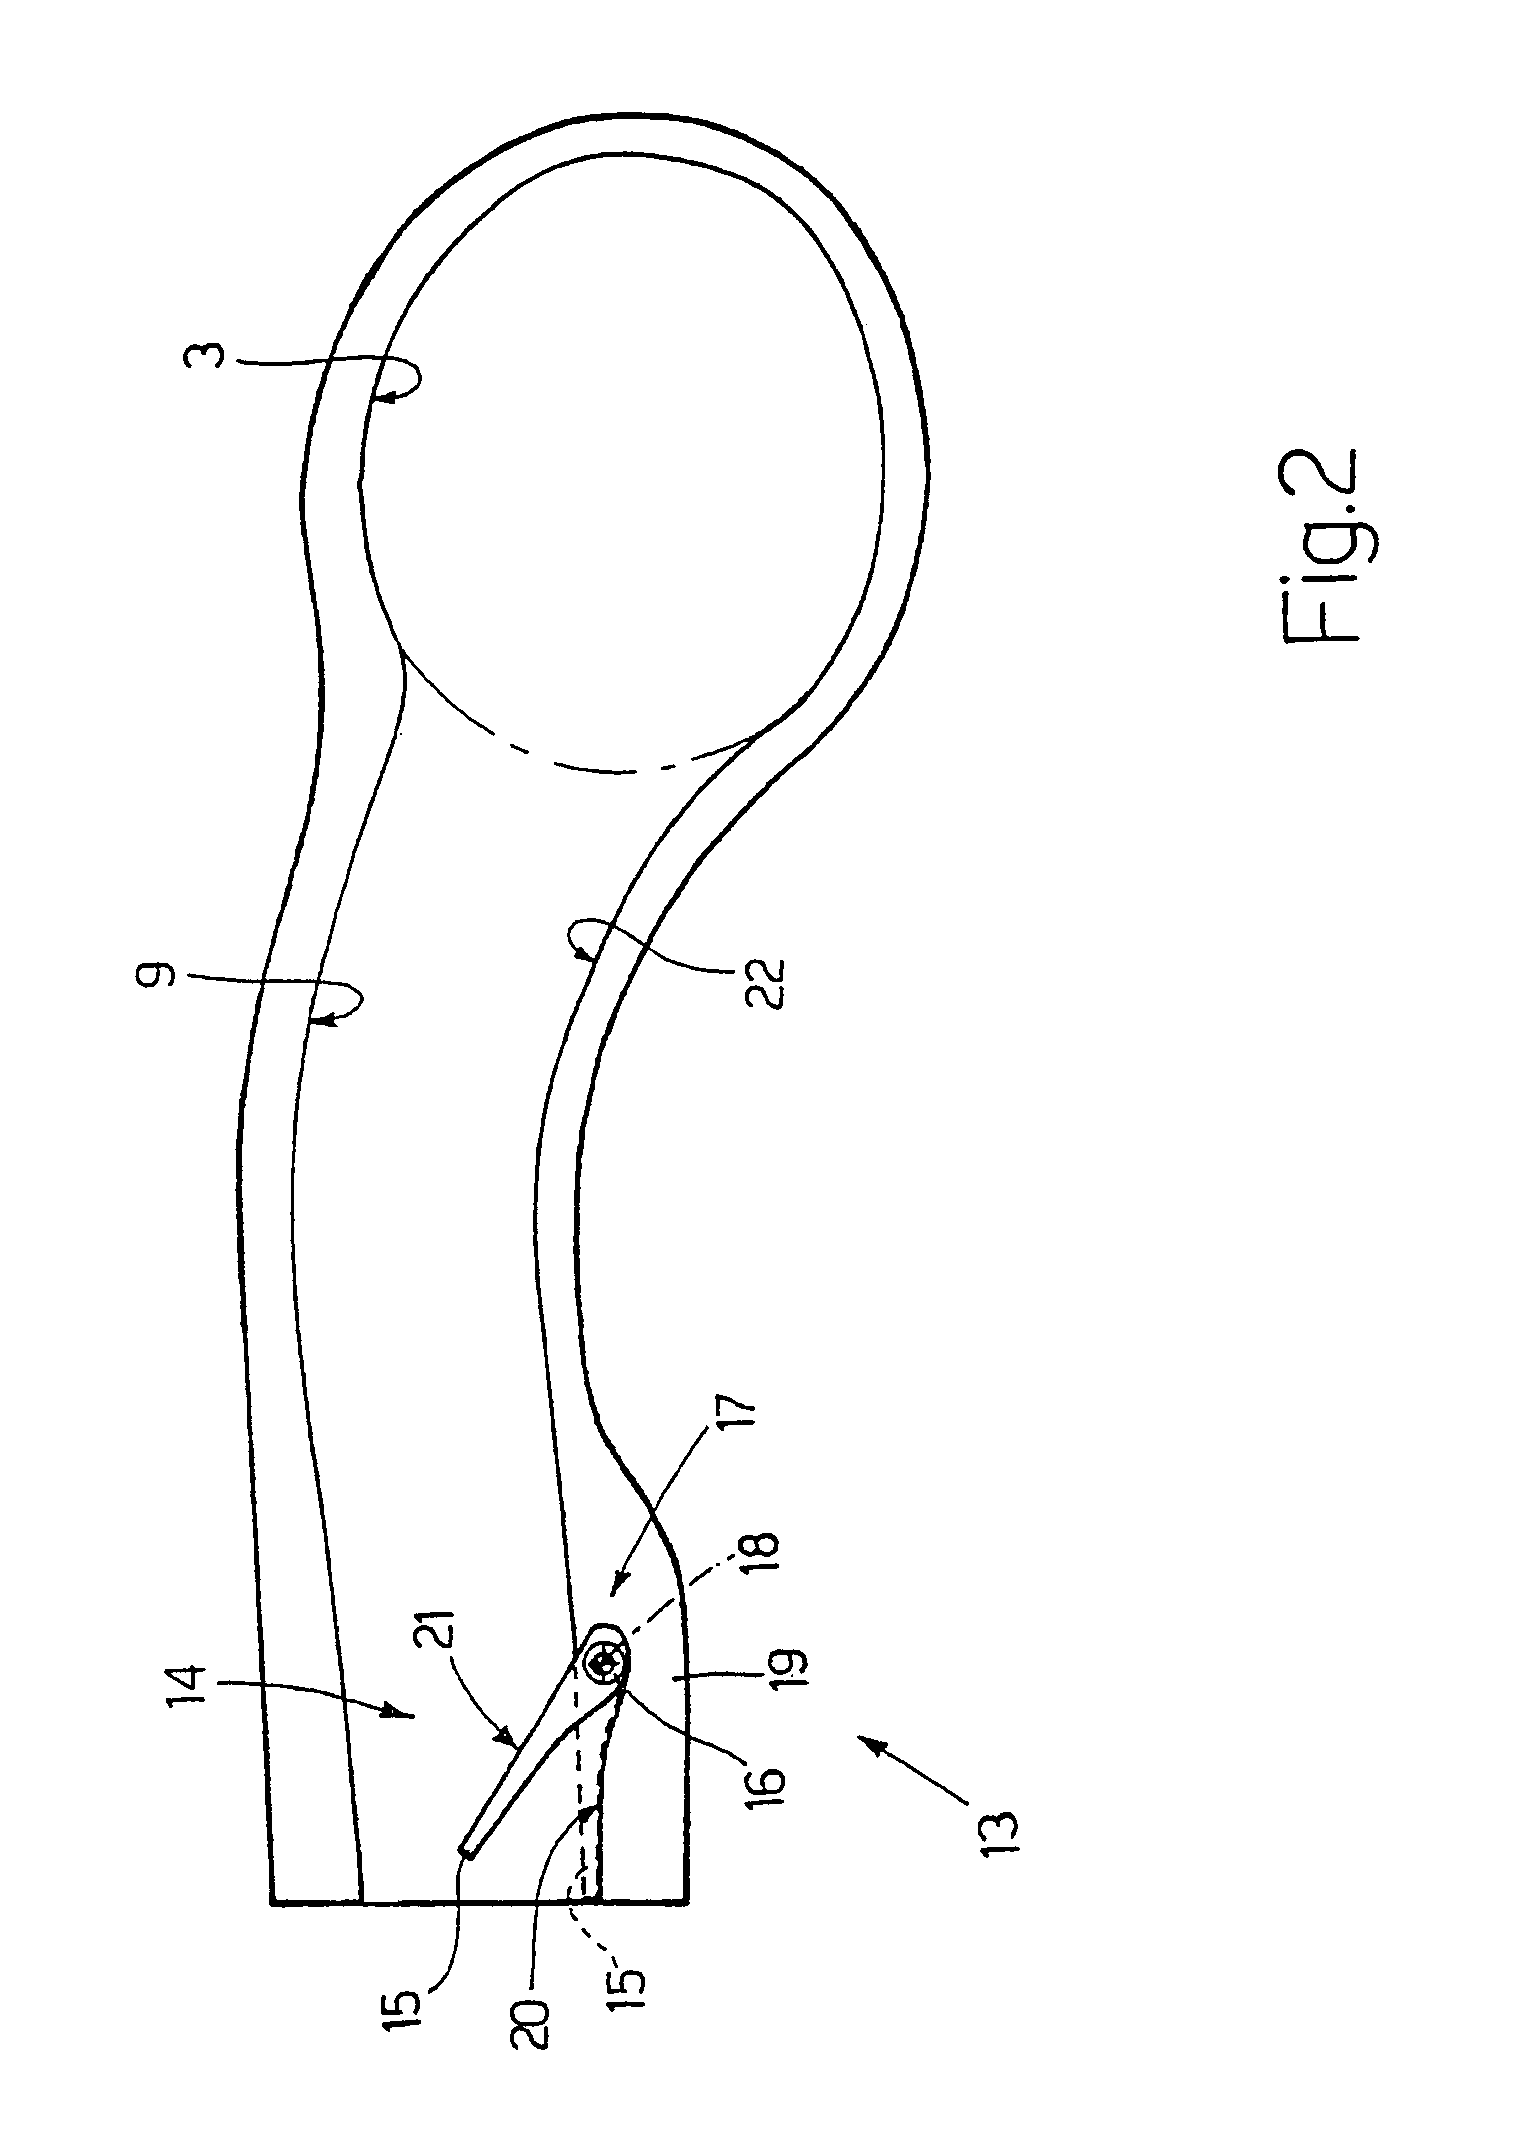 Choke valve provided with an integrated electromagnetic actuator for an intake manifold with a retracting tumble system